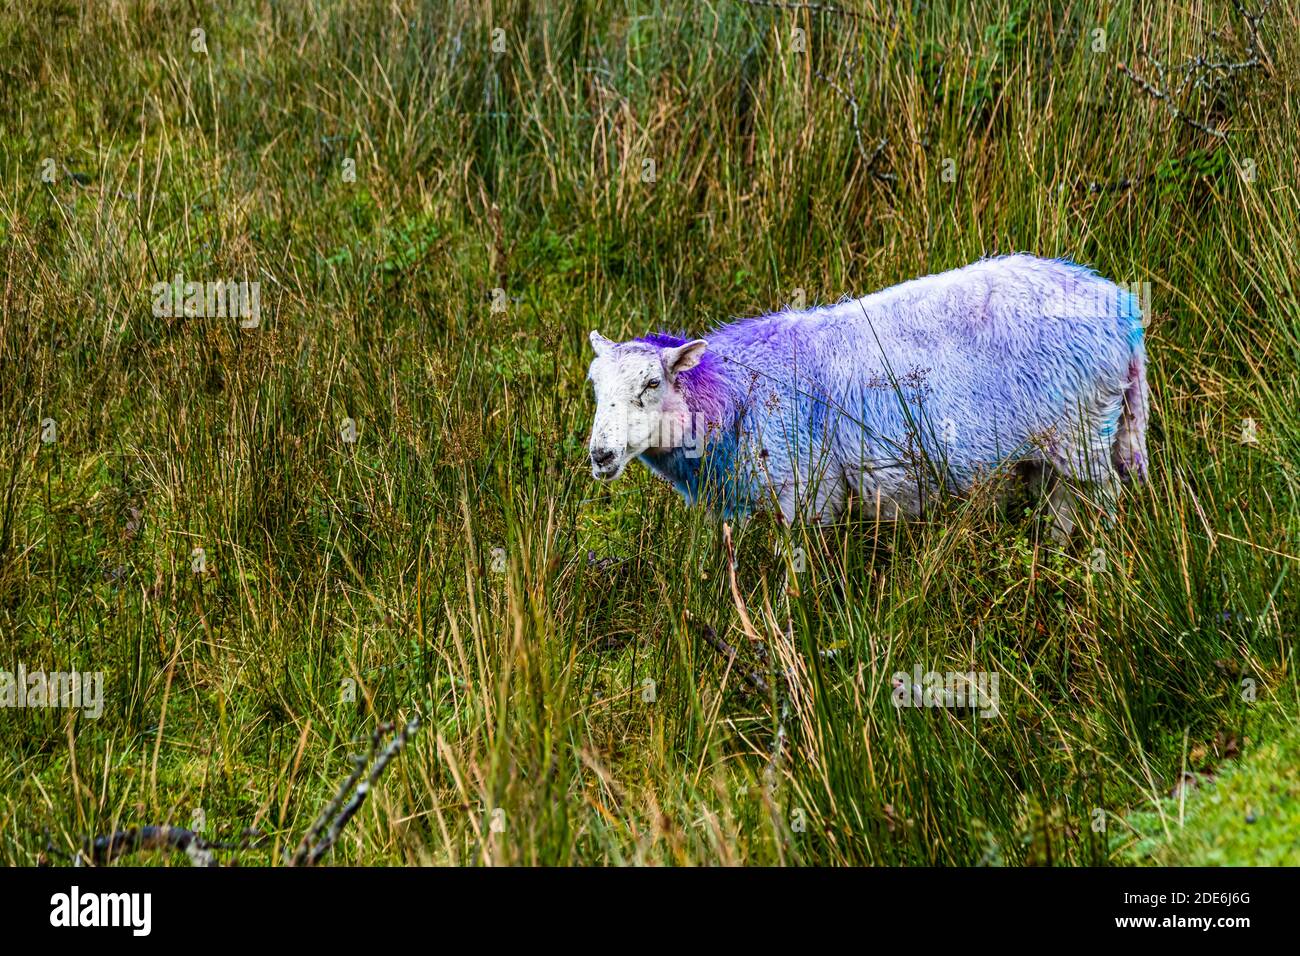 Colored sheep in the Gap of Dunloe, Ireland Stock Photo